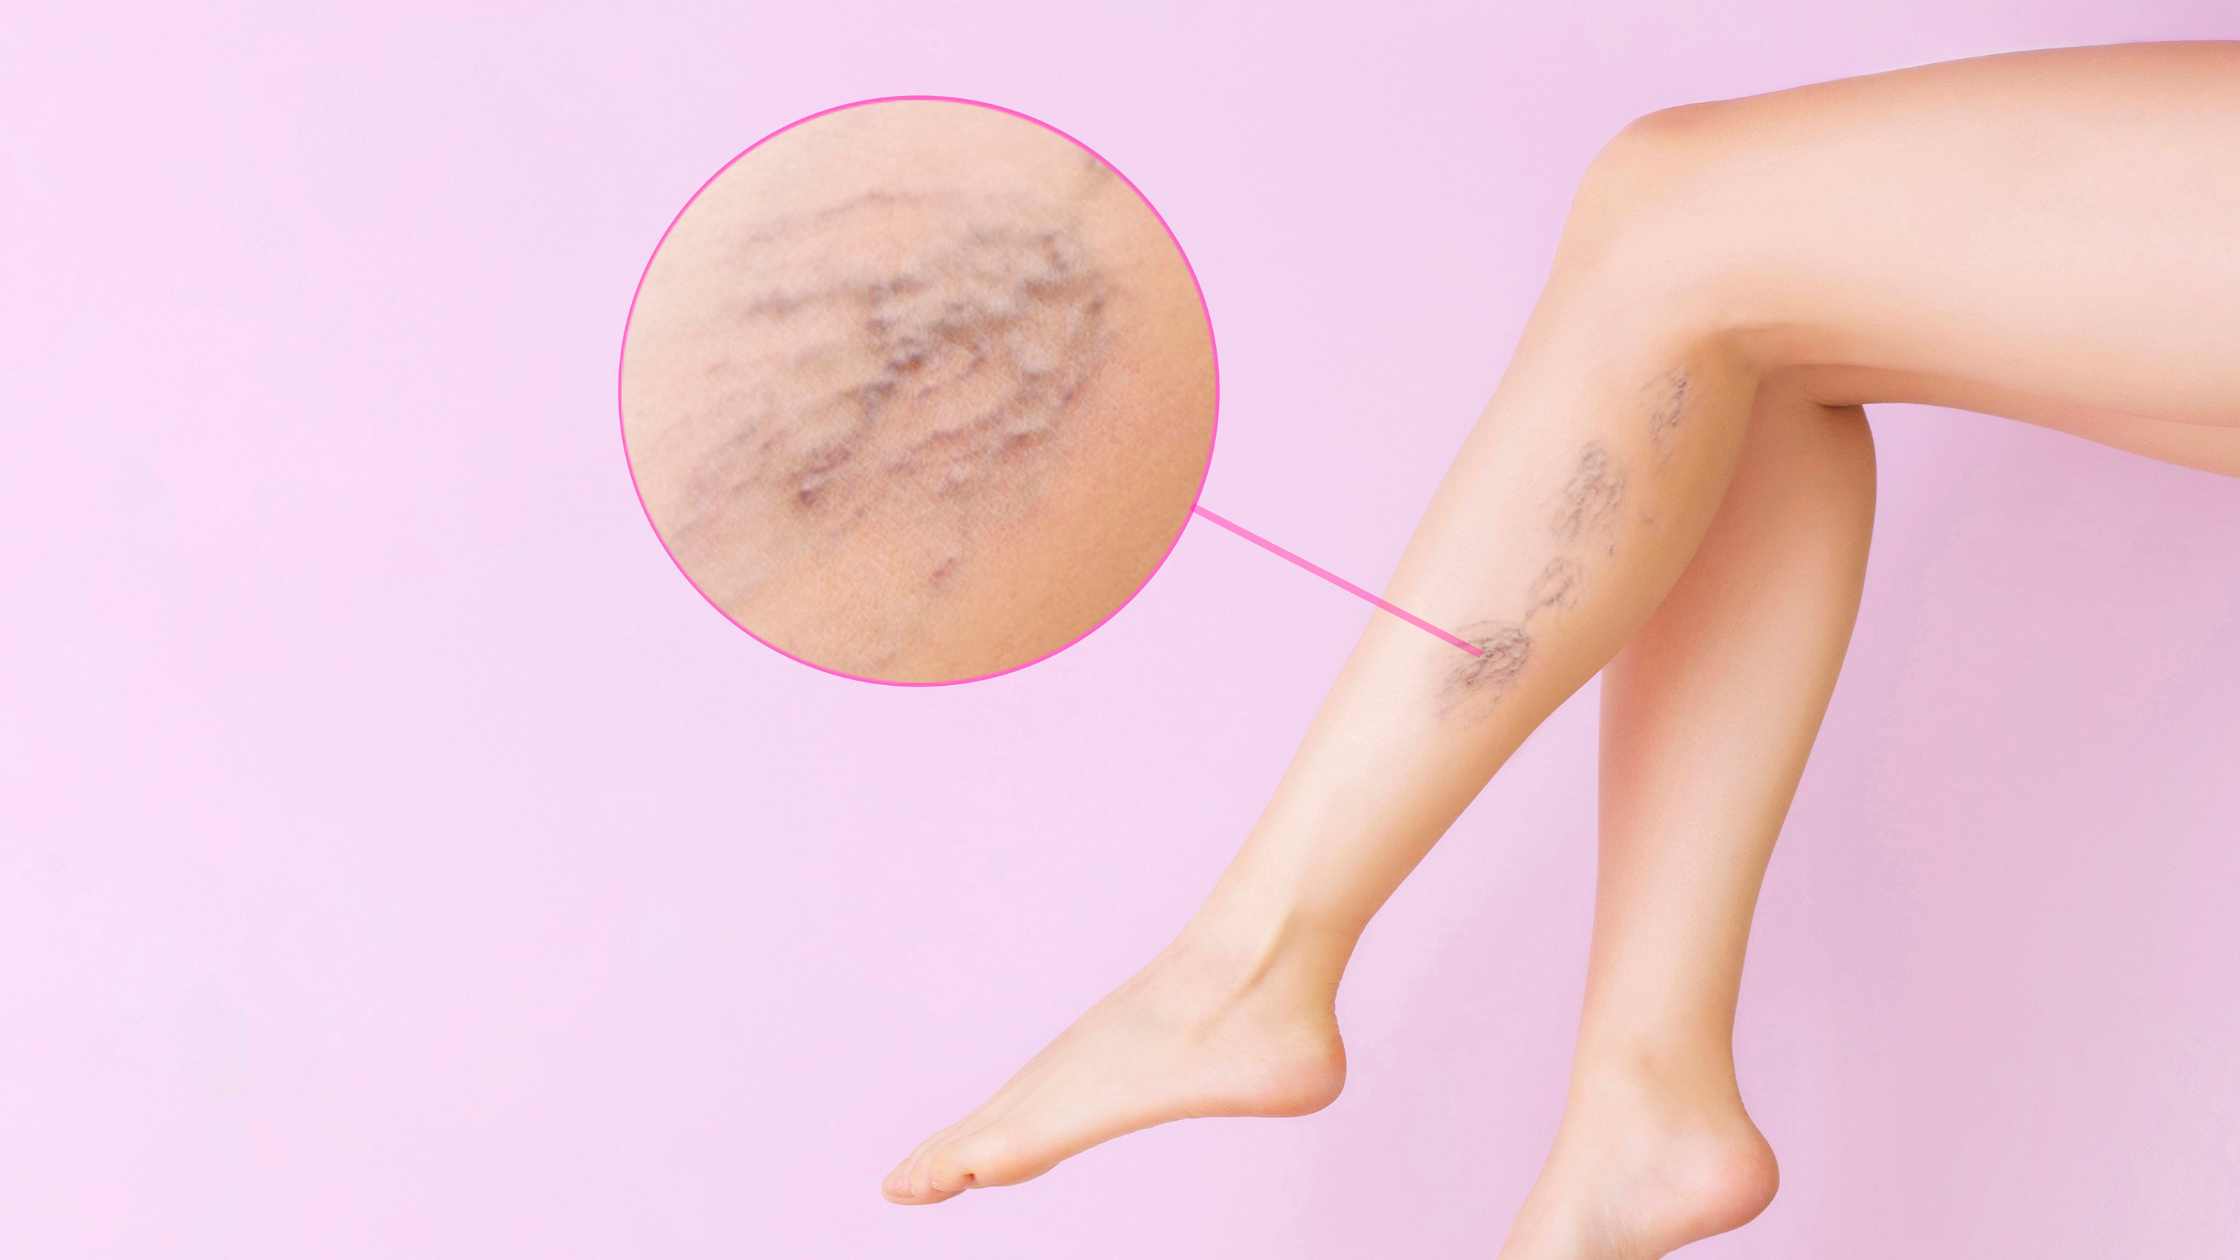 naked human legs and a close-up of varicose veins